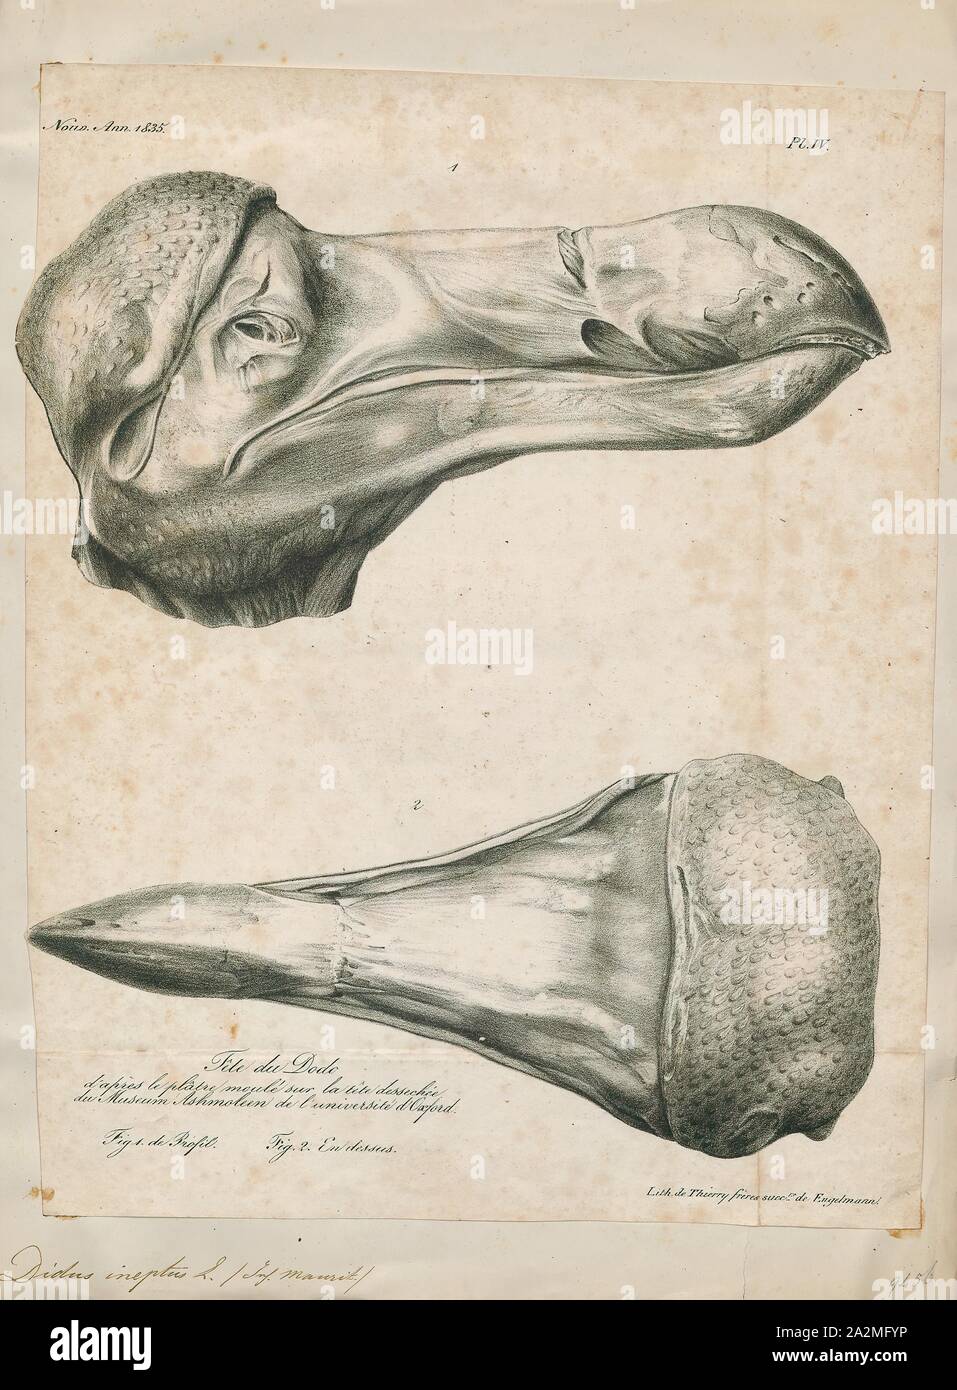 Didus ineptus, Print, The dodo (Raphus cucullatus) is an extinct flightless bird that was endemic to the island of Mauritius, east of Madagascar in the Indian Ocean. The dodo's closest genetic relative was the also-extinct Rodrigues solitaire, the two forming the subfamily Raphinae of the family of pigeons and doves. The closest living relative of the dodo is the Nicobar pigeon. A white dodo was once thought to have existed on the nearby island of Réunion, but this is now thought to have been confusion based on the Réunion ibis and paintings of white dodos., skull Stock Photo